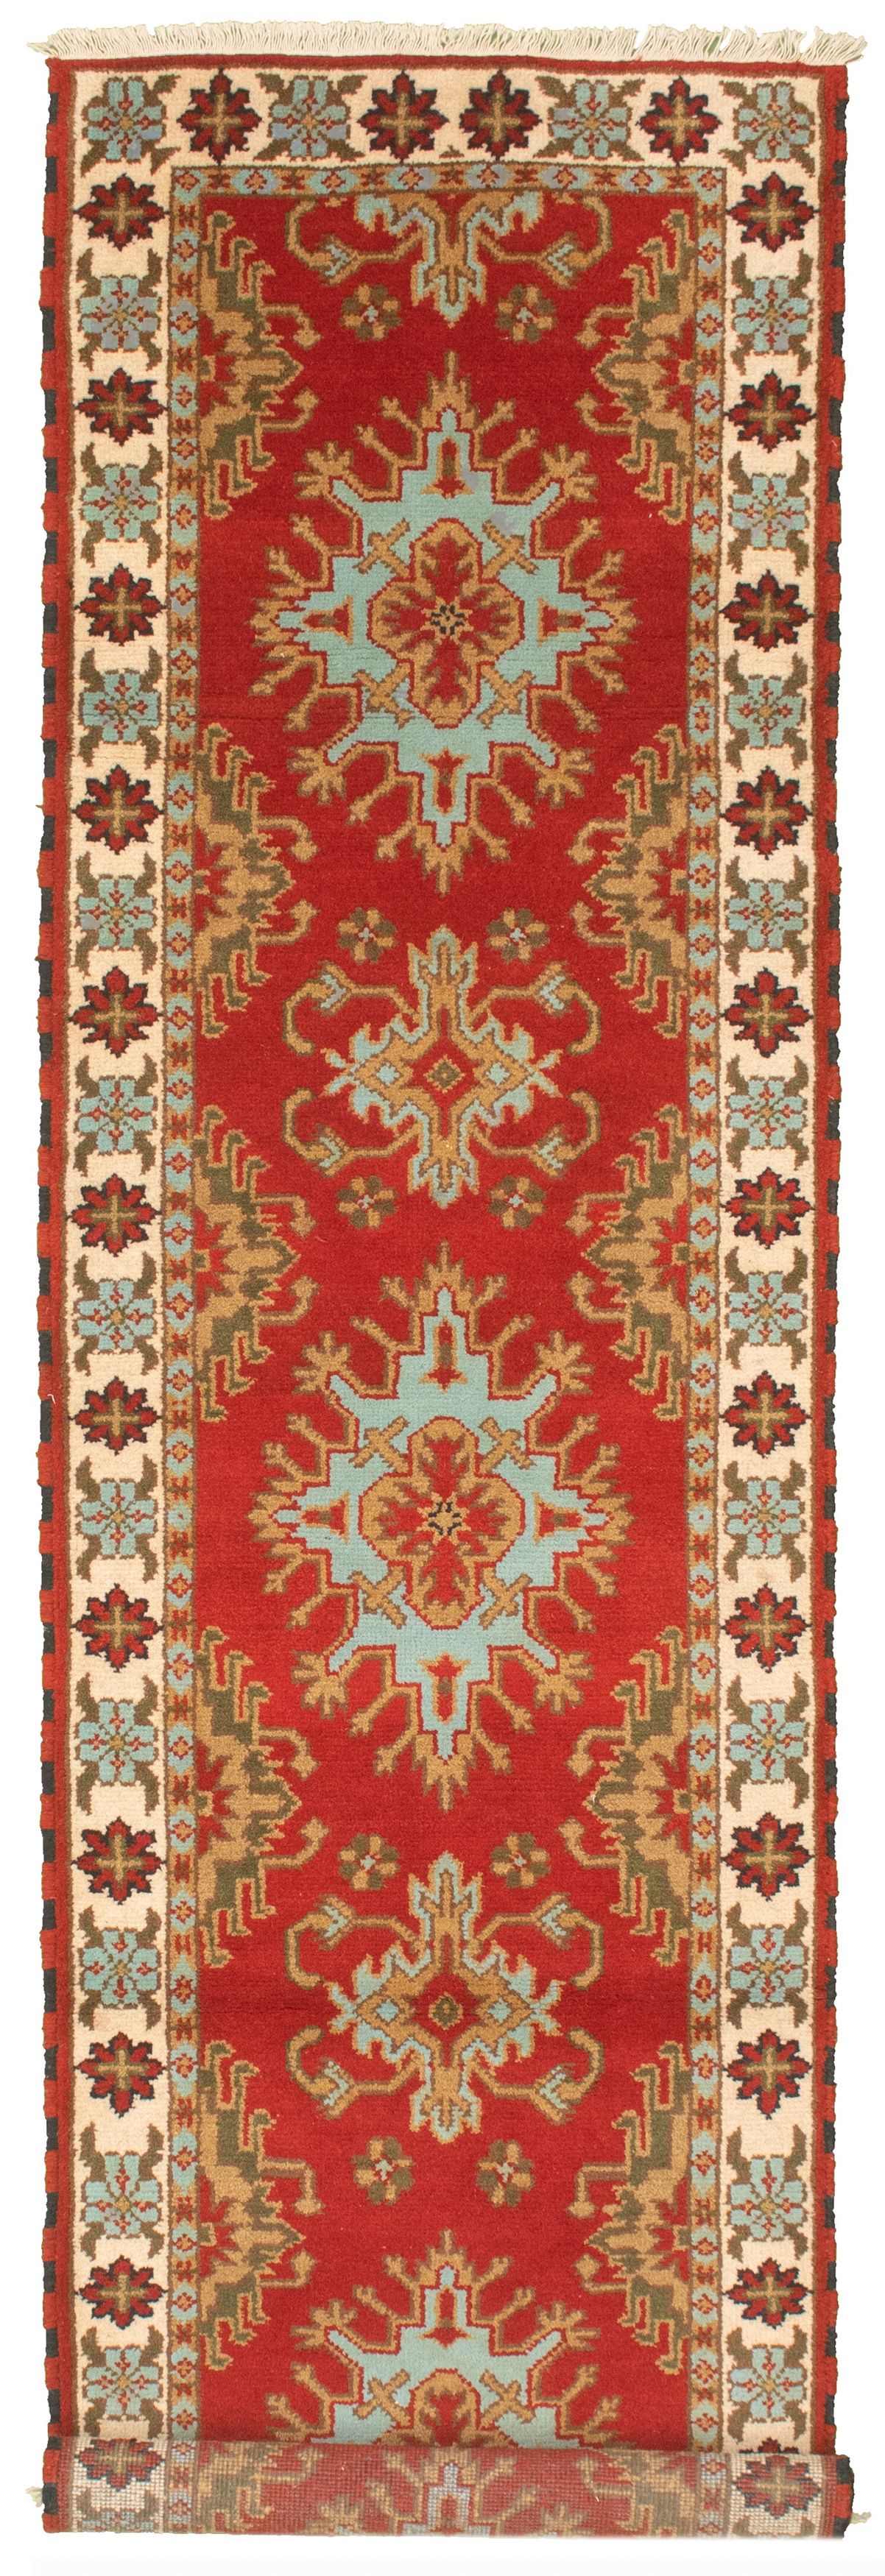 Hand-knotted Royal Kazak Red Wool Rug 2'9" x 10'6" Size: 2'9" x 10'6"  